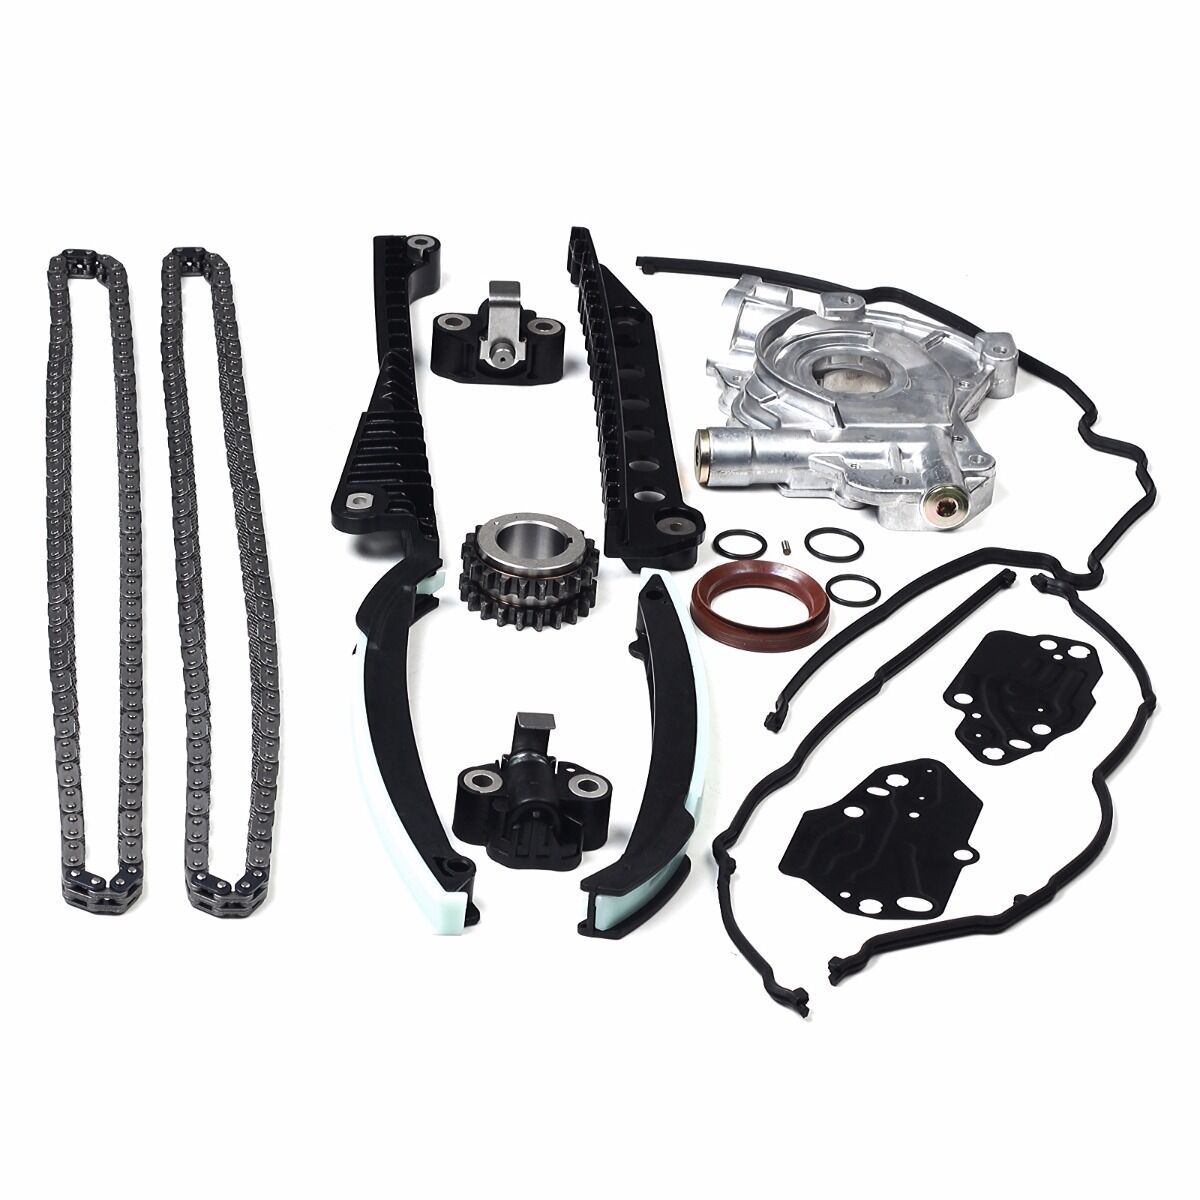 Timing Chain Oil Pump Kit + Cover Gaskets 04-08 For Ford F150 Lincoln 5.4L 3V